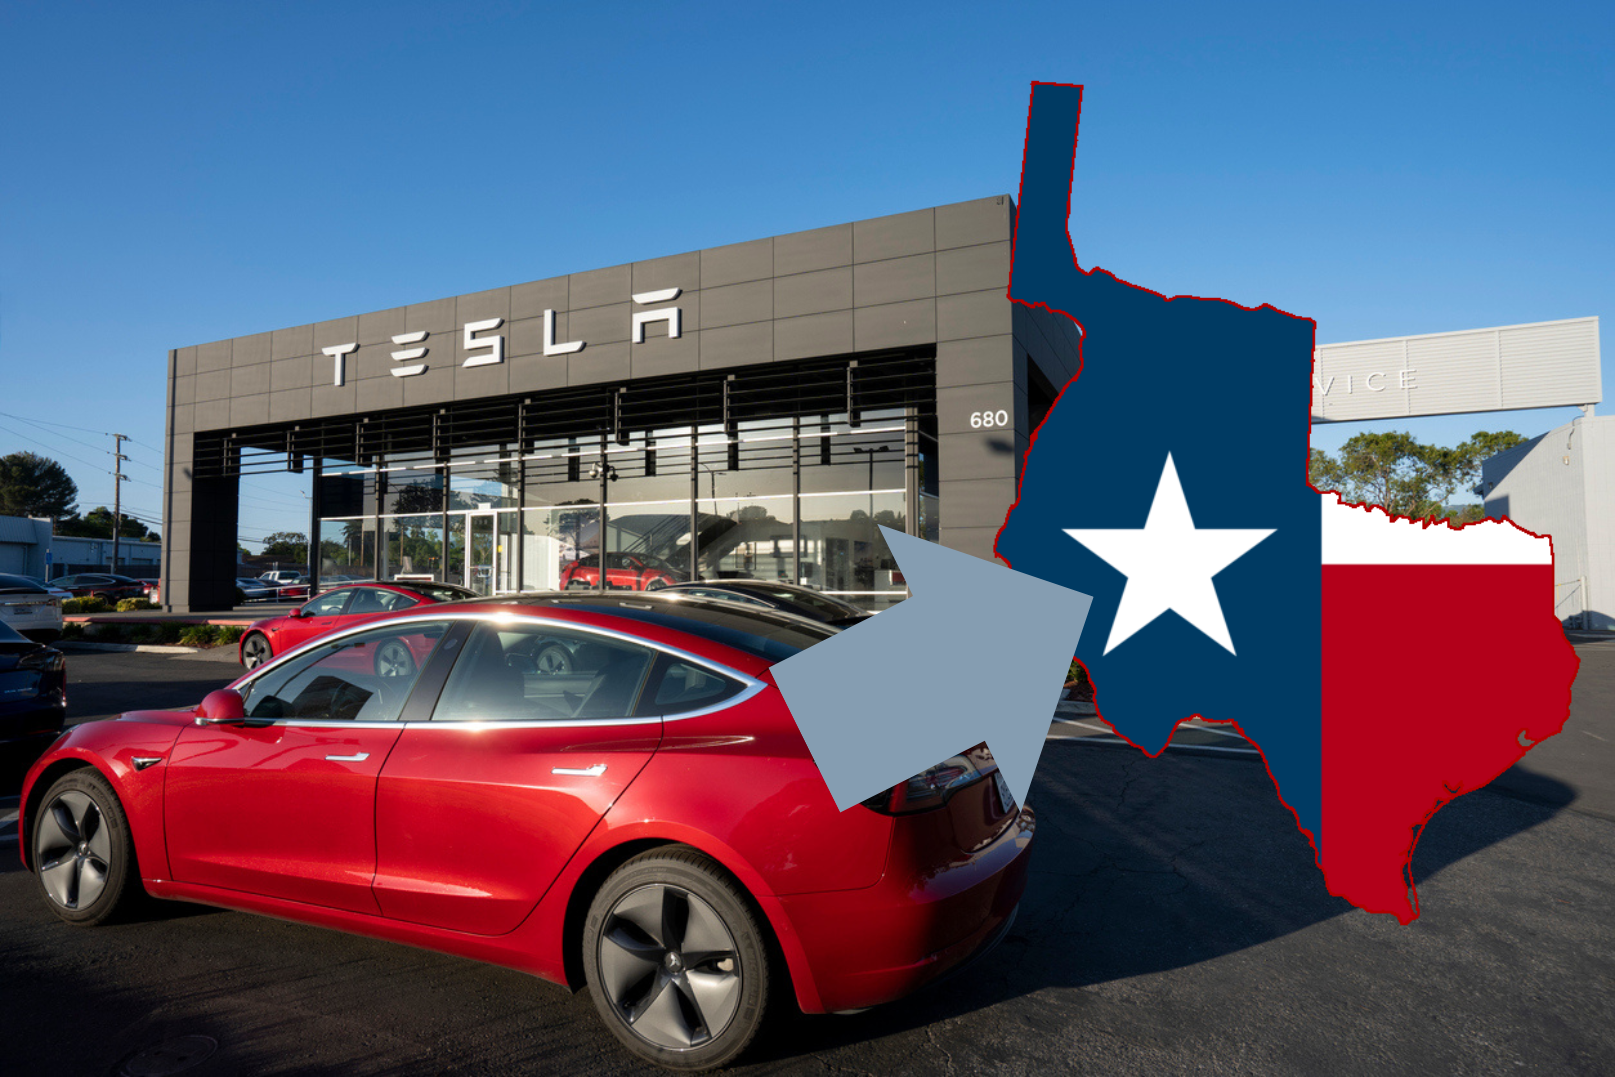 Elon Musk Proposes Relocating Tesla’s Incorporation to Texas Following Legal Dispute